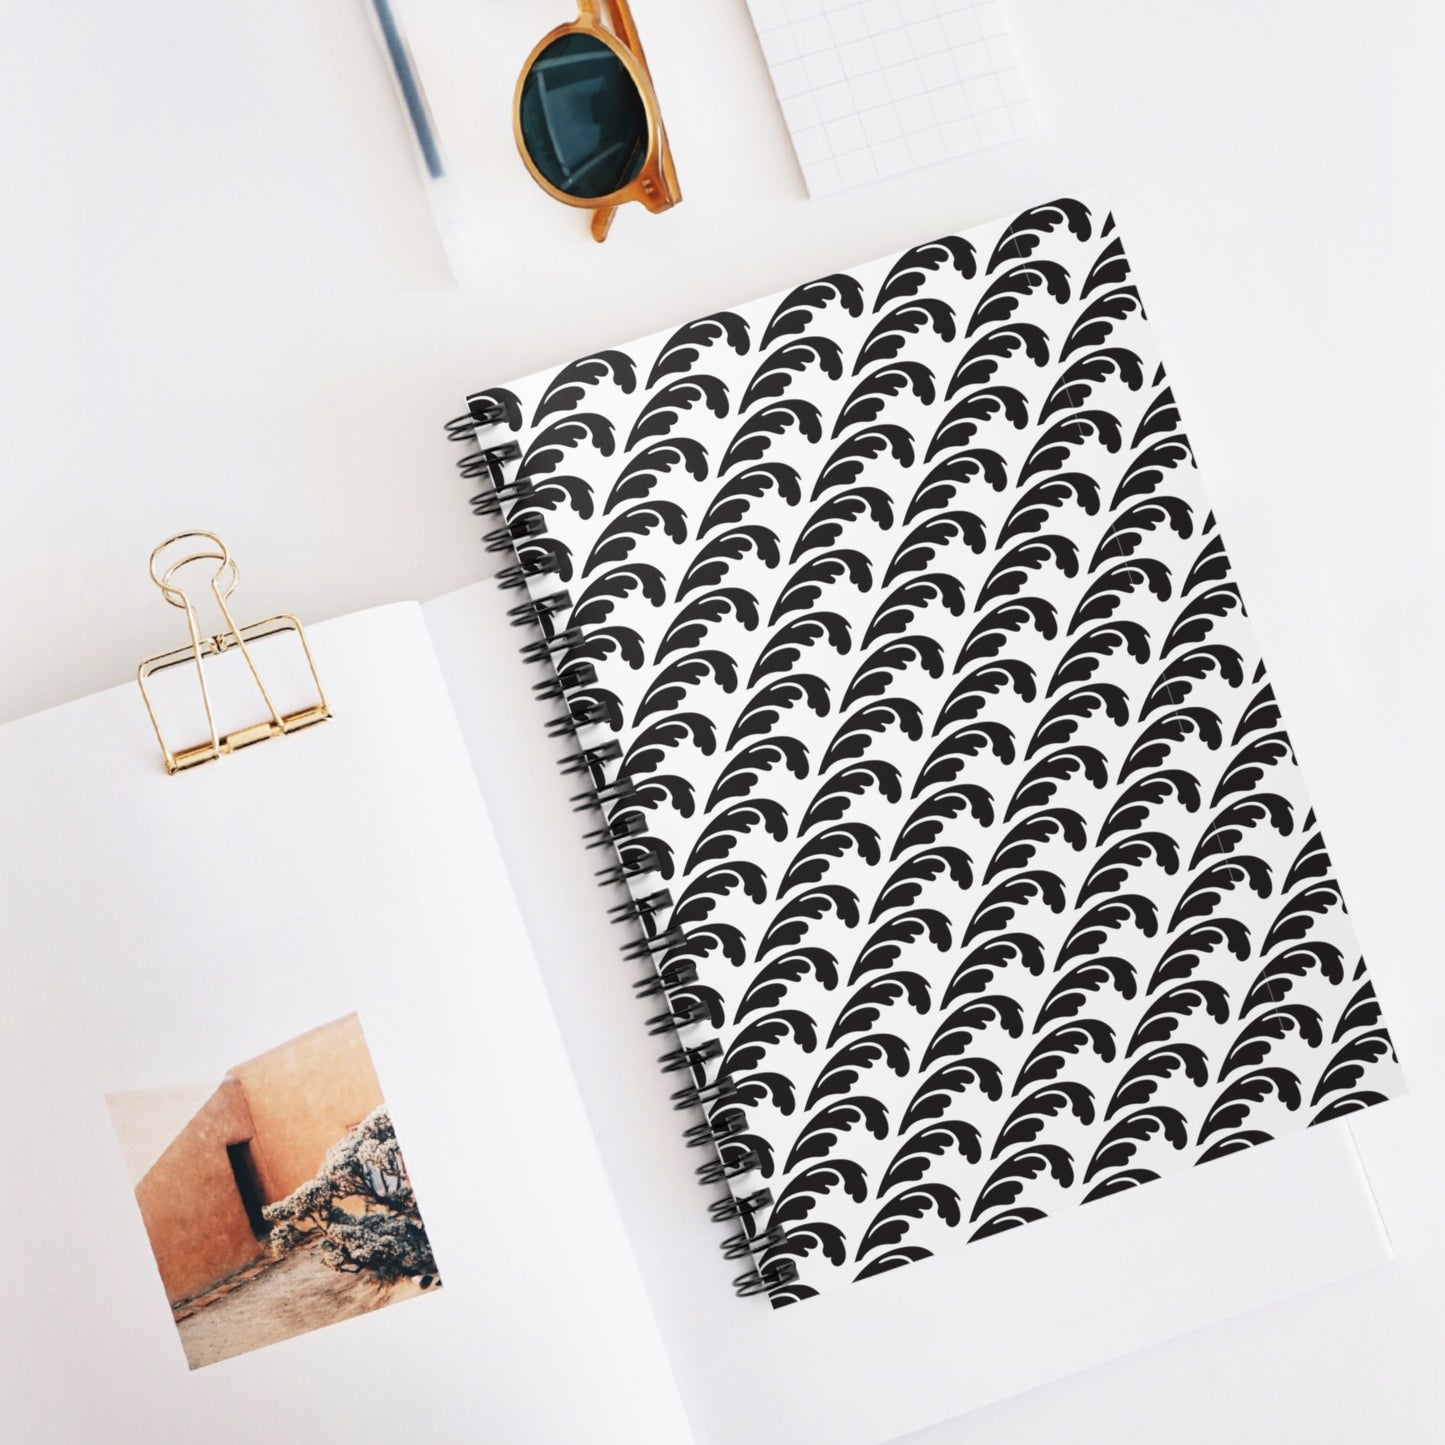 Beautiful Beloved One - Spiral Notebook - Ruled Line- black/white